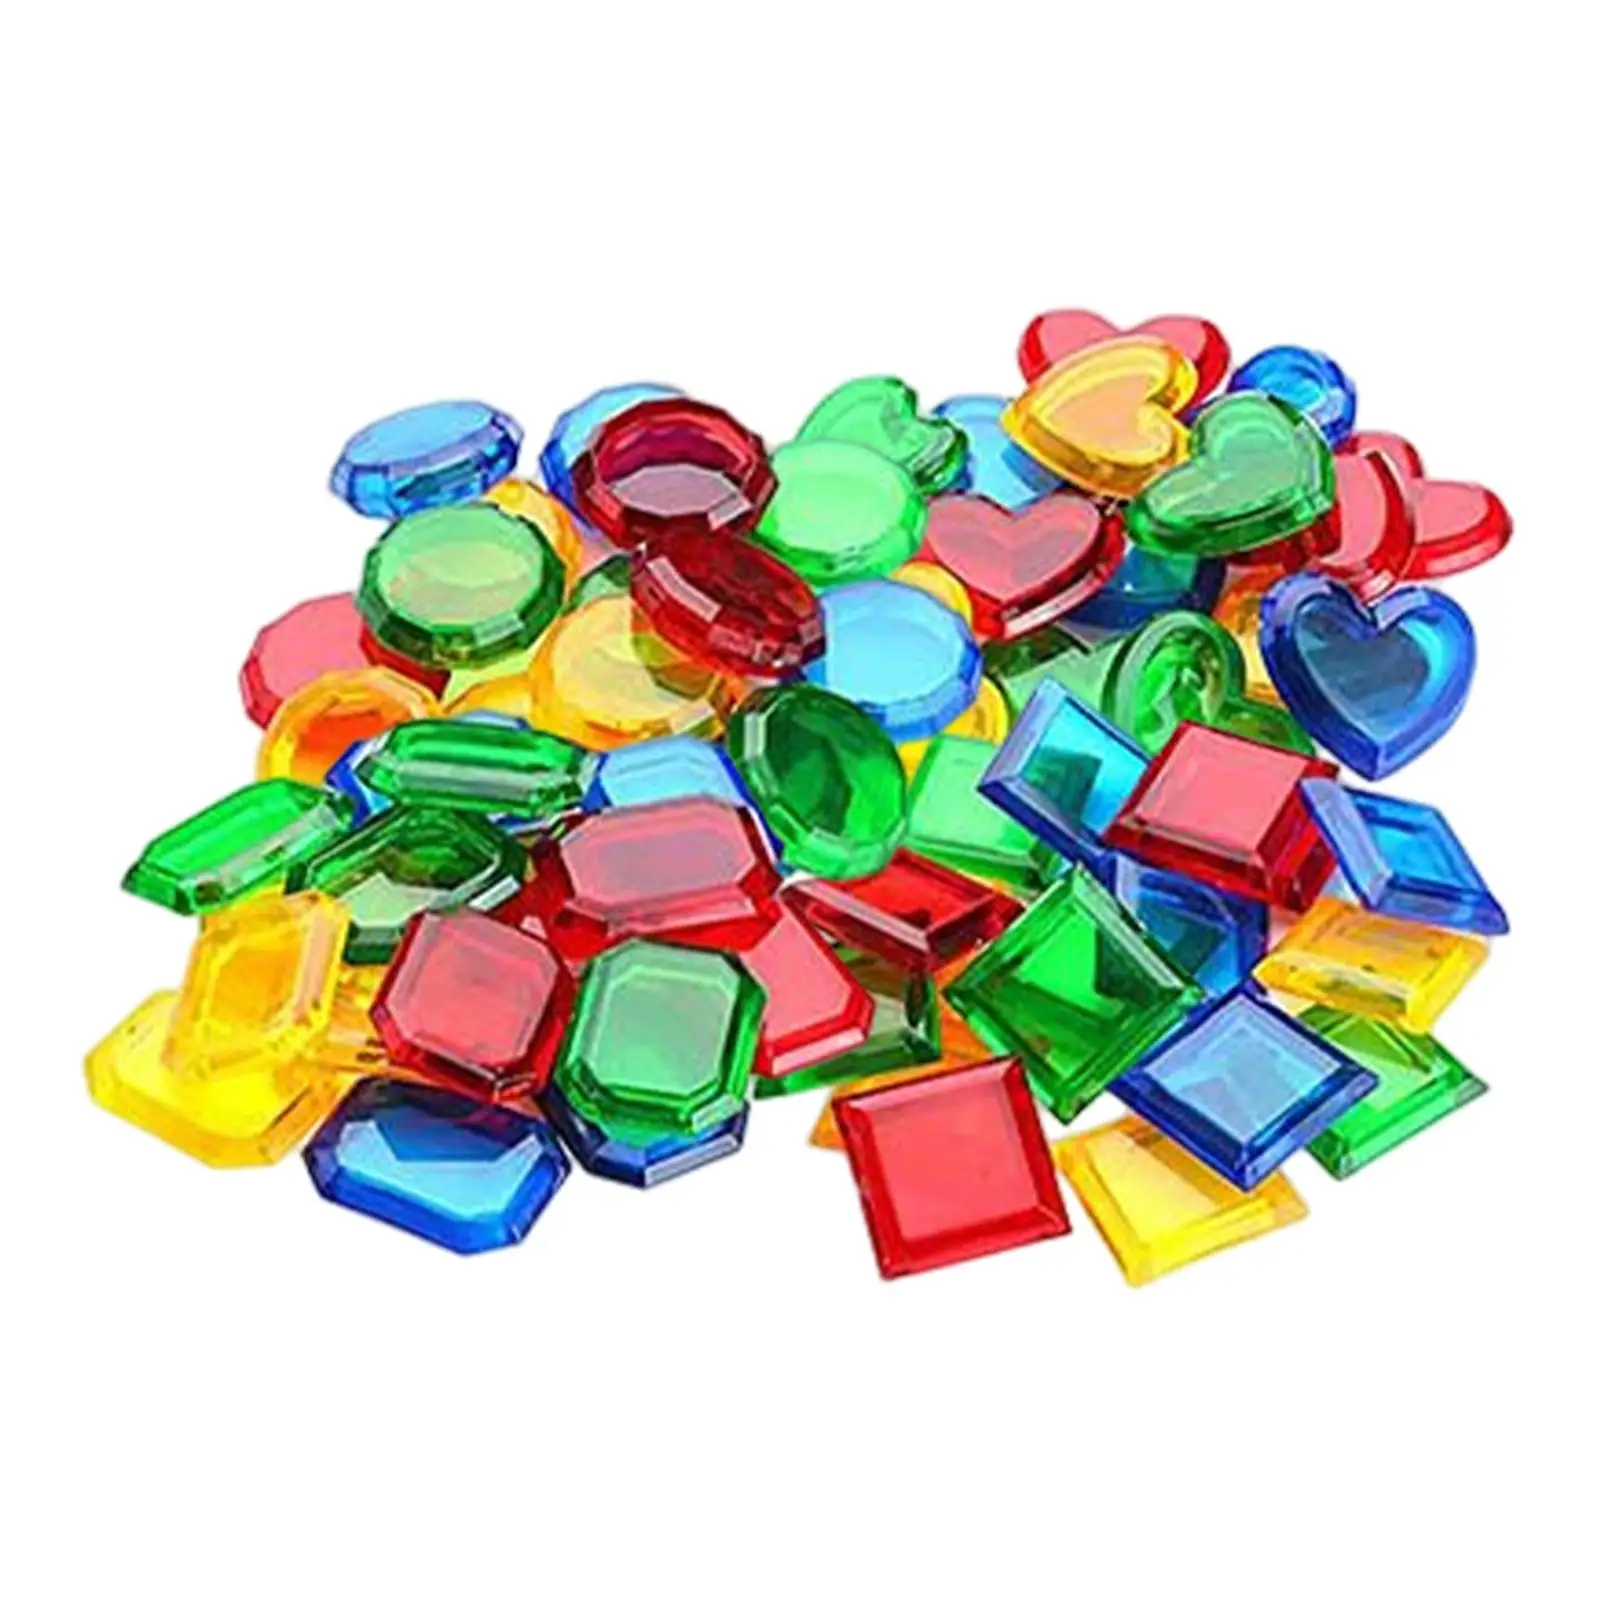 32x Diving Toy Gifts Sensory Toys Decoration for Travel Preschool Parties Swimming Pool